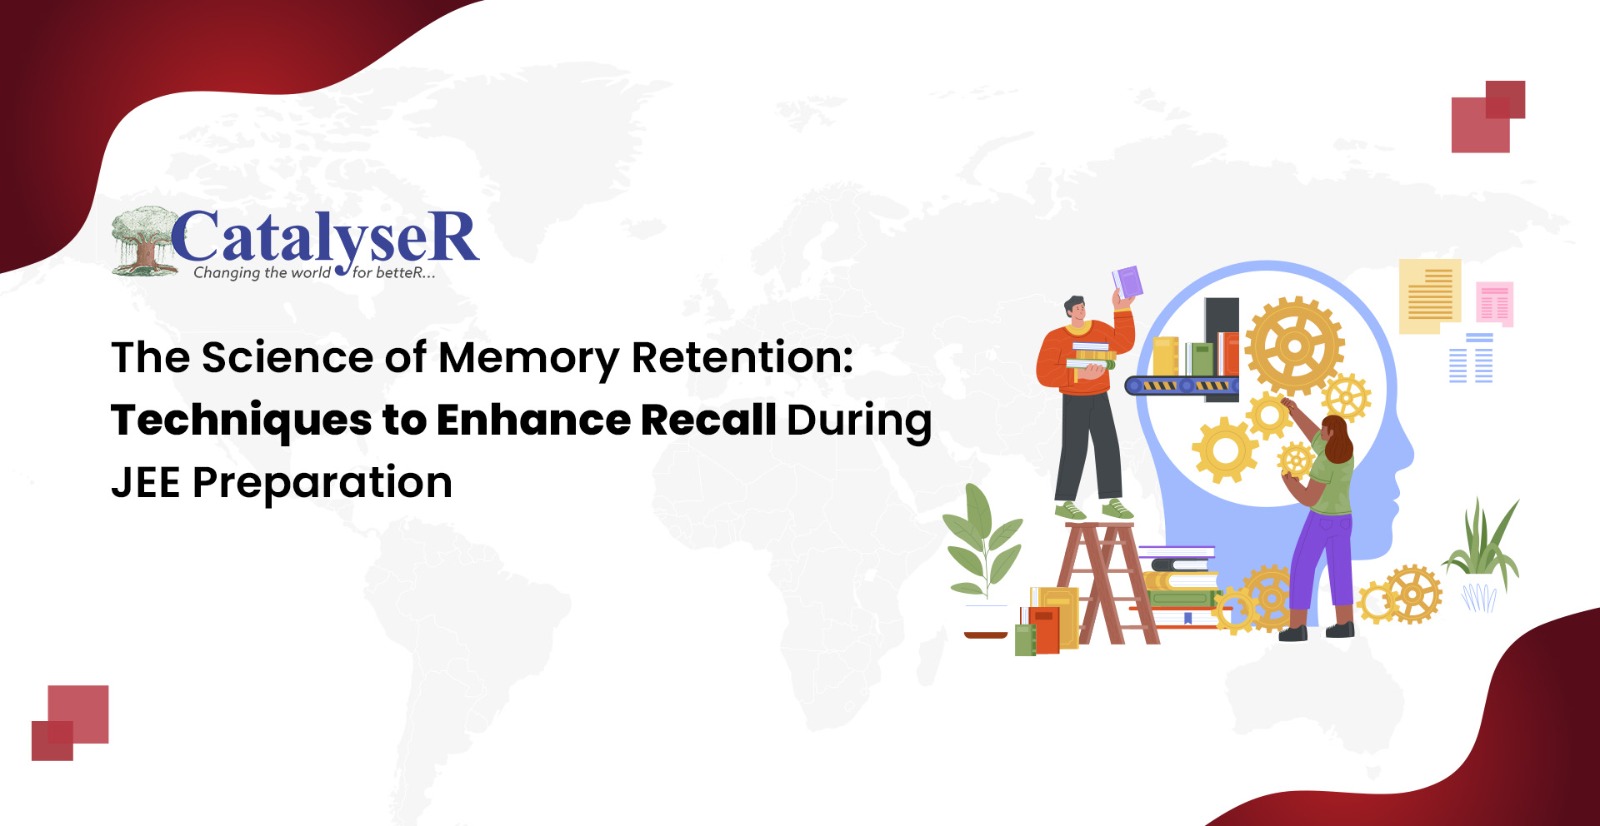 The Science of Memory Retention: Techniques to Enhance Recall During JEE Preparation